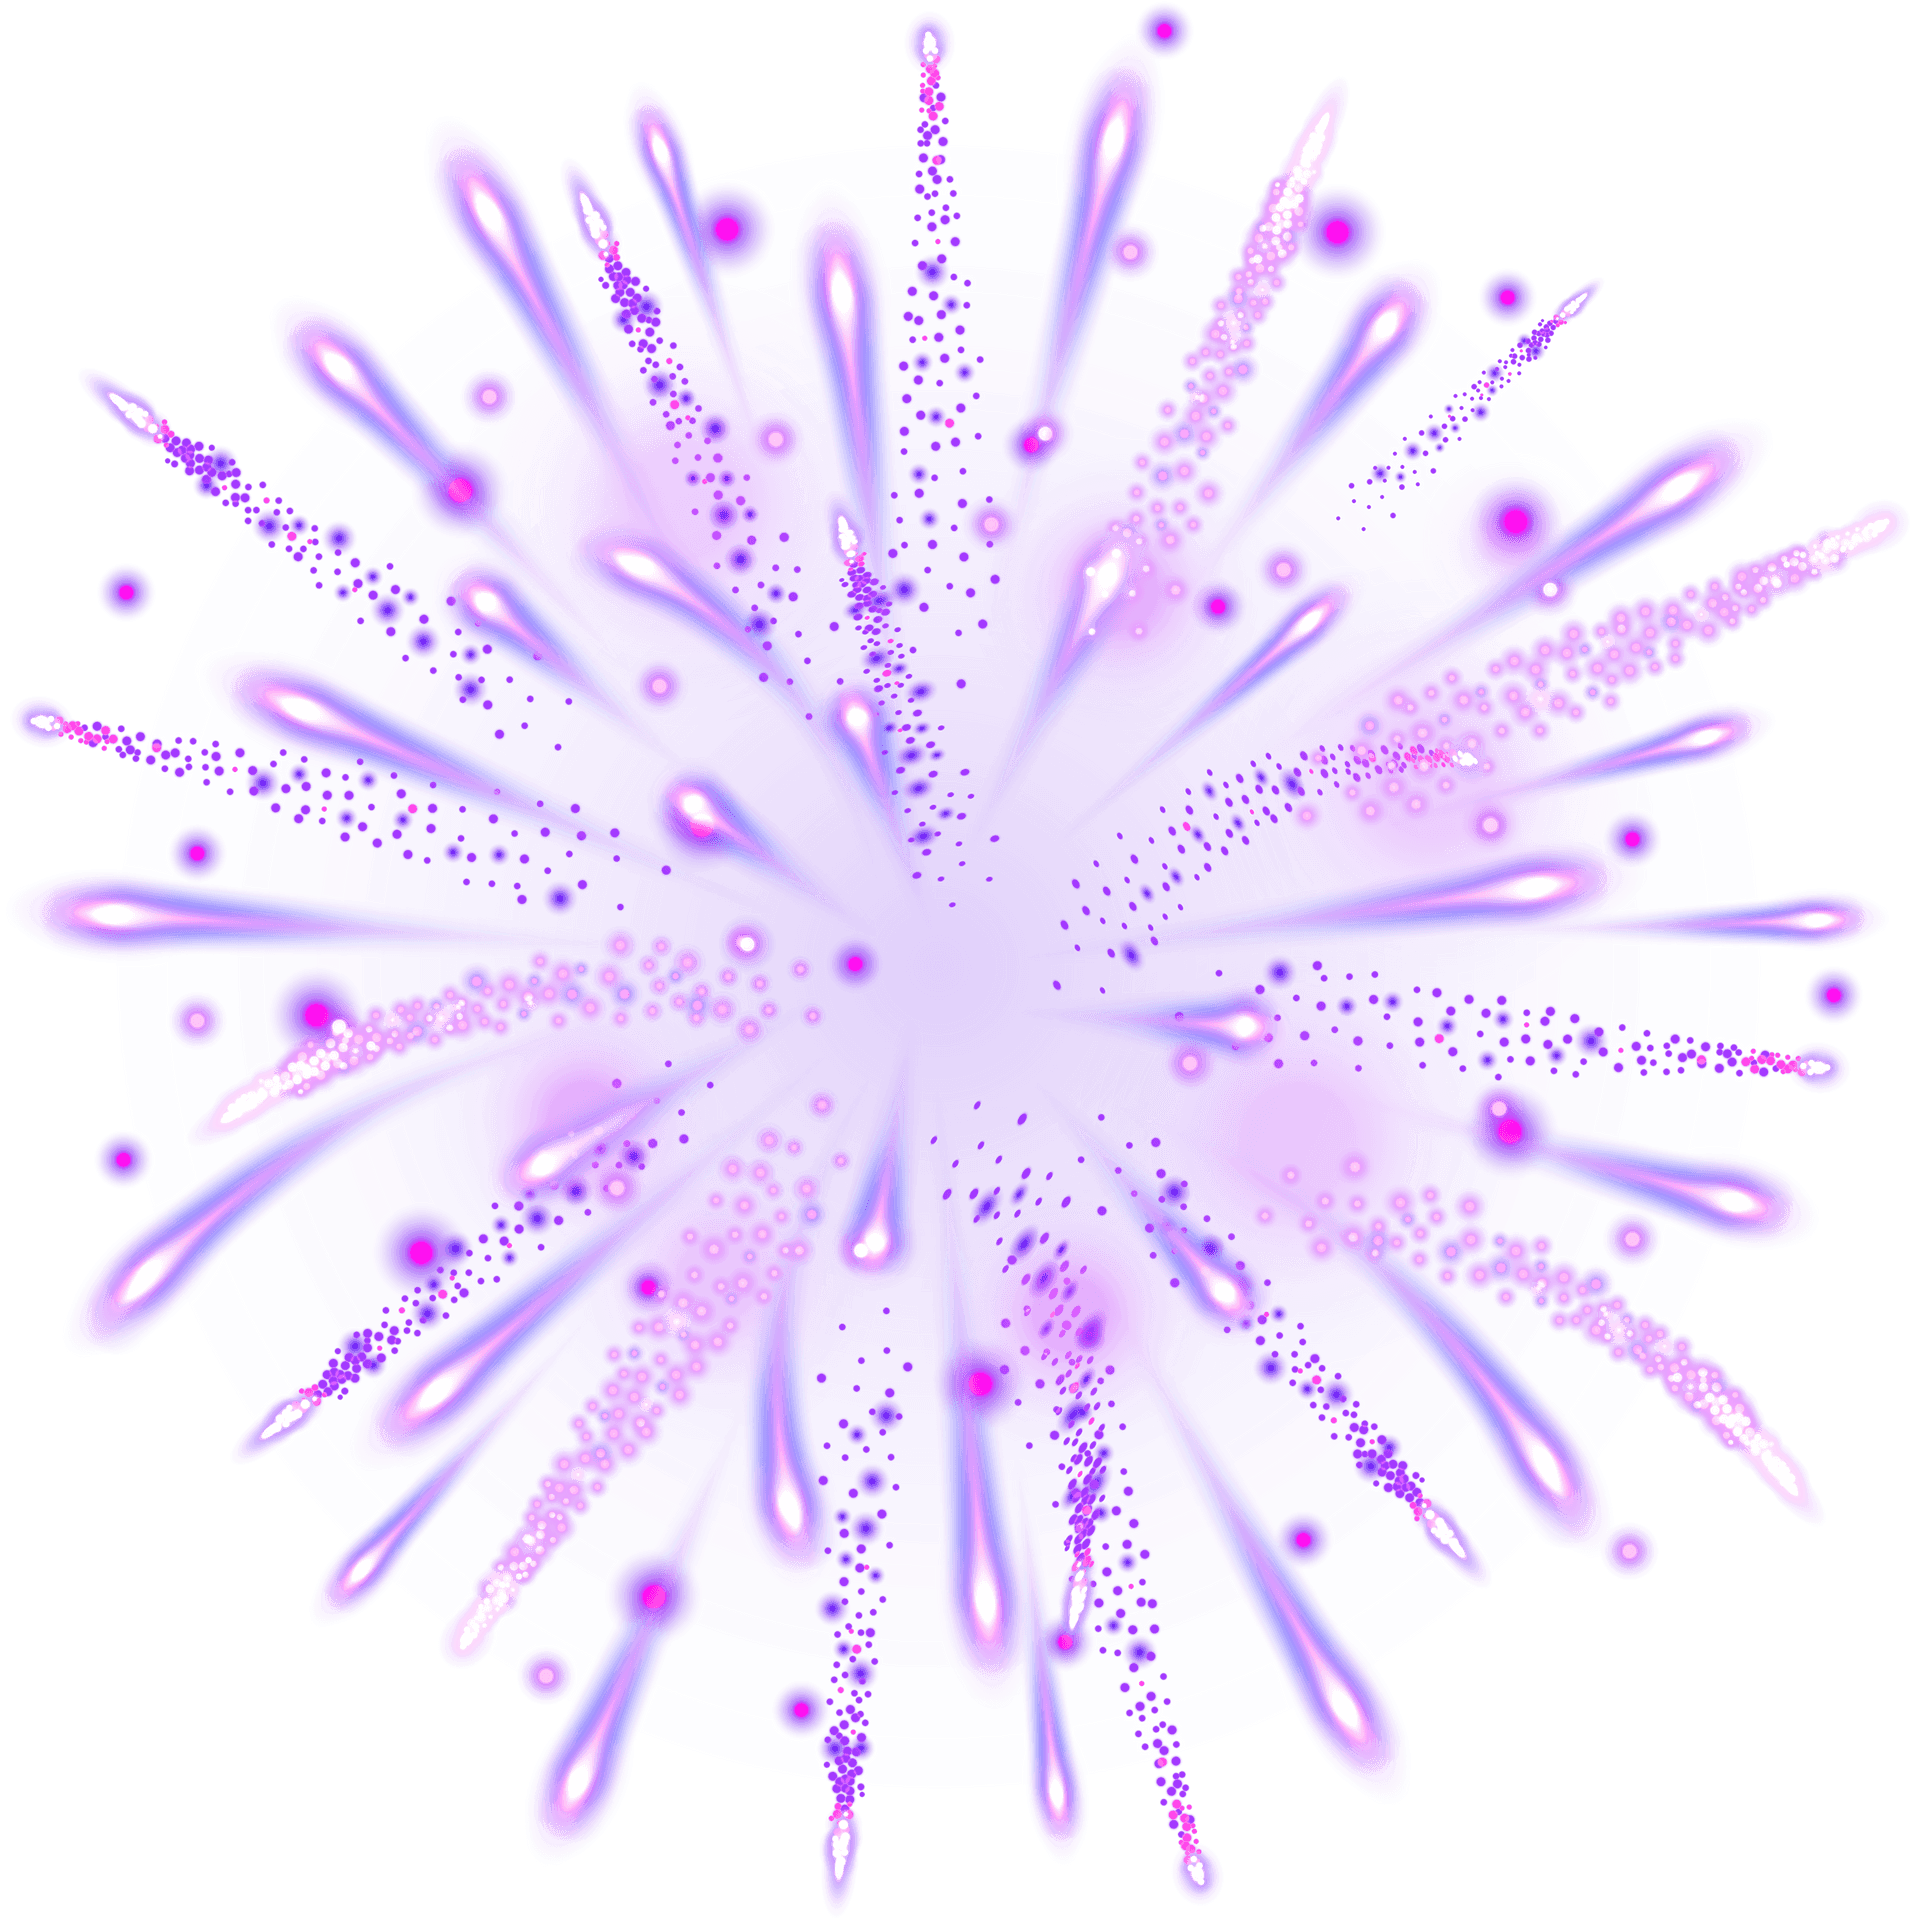 Purple Firework Explosion Clipart PNG image